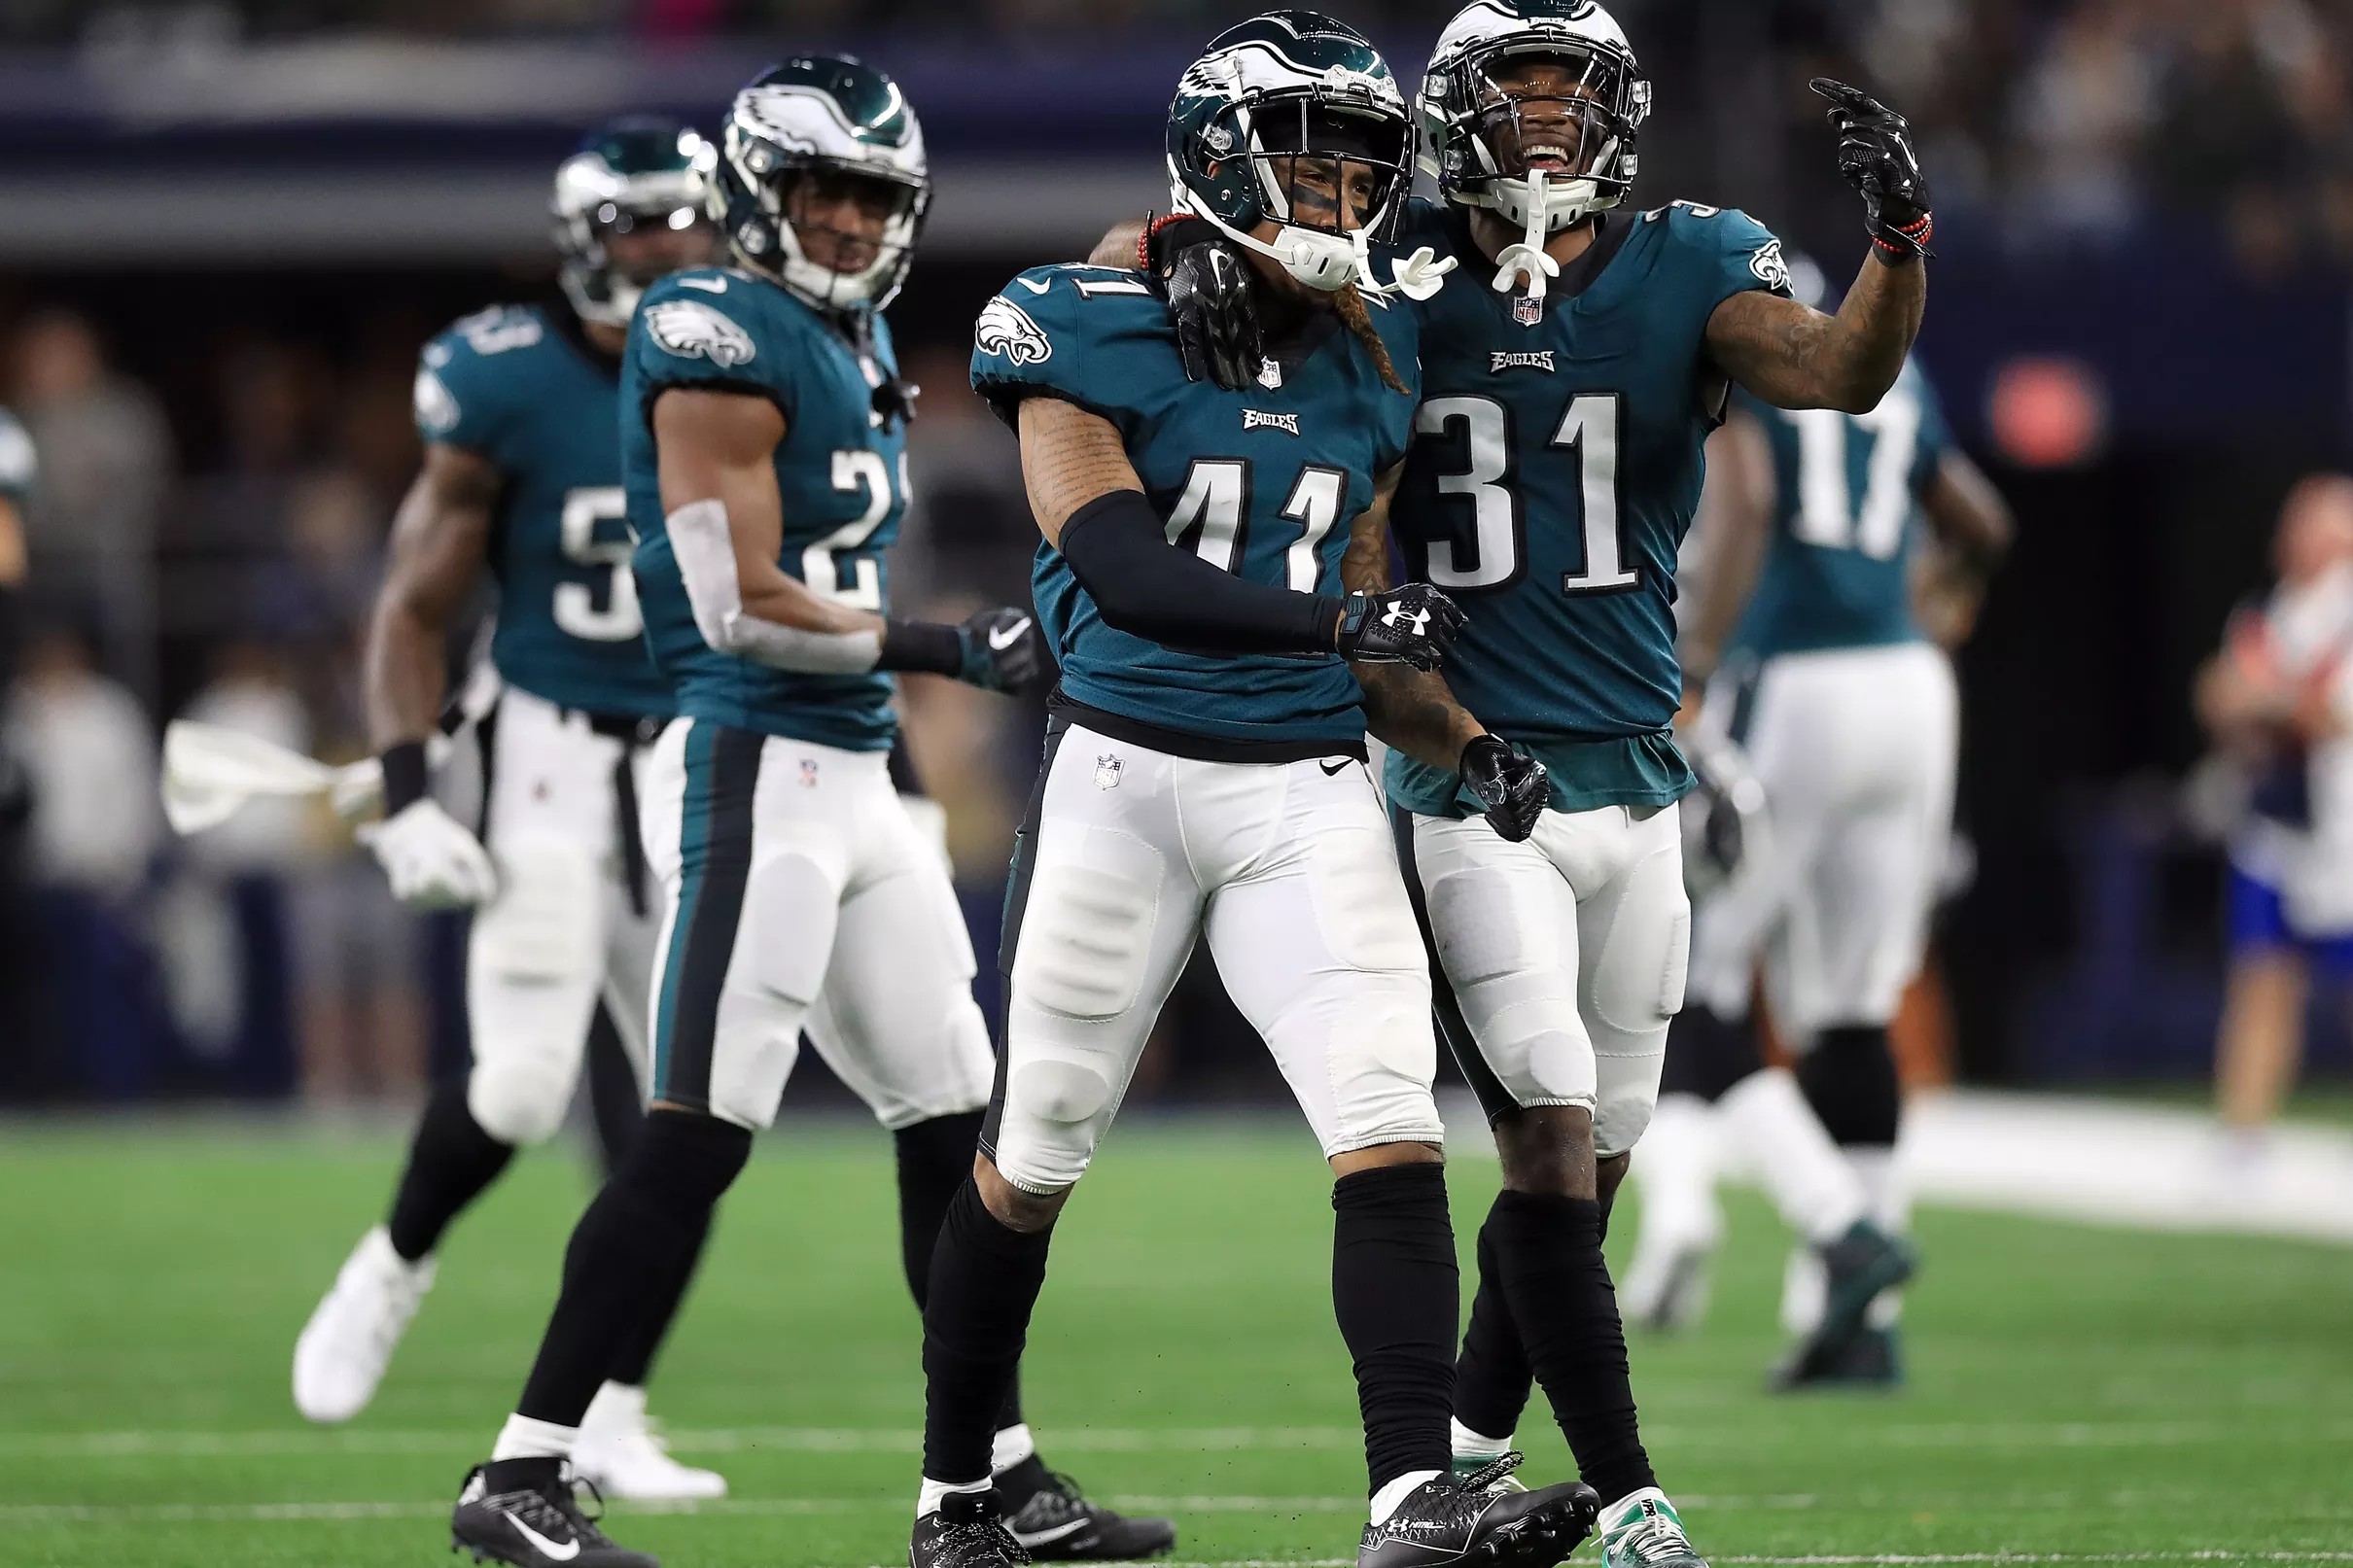 Eagles cornerbacks youth, talent, and uncertainty